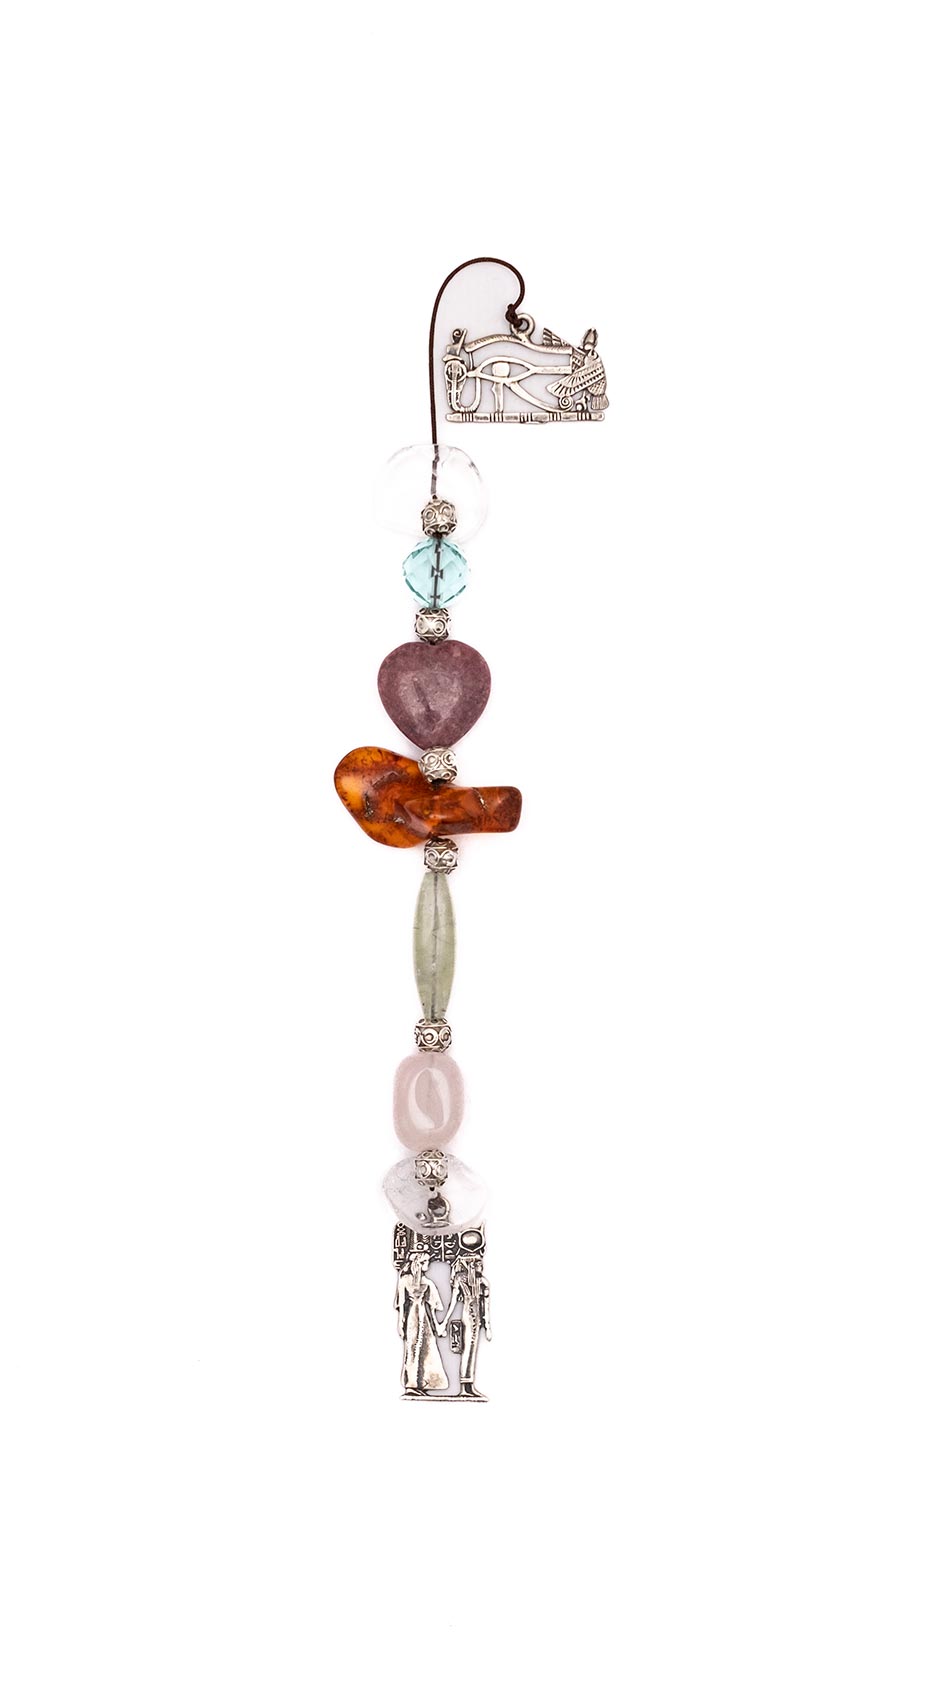 Love - Couple : For the love that is renewed eternally. Amulet with semi-precious stones:quartz,jade,Mother of pearl,ceramic scarab,blou topaz,pink quartz,tin.